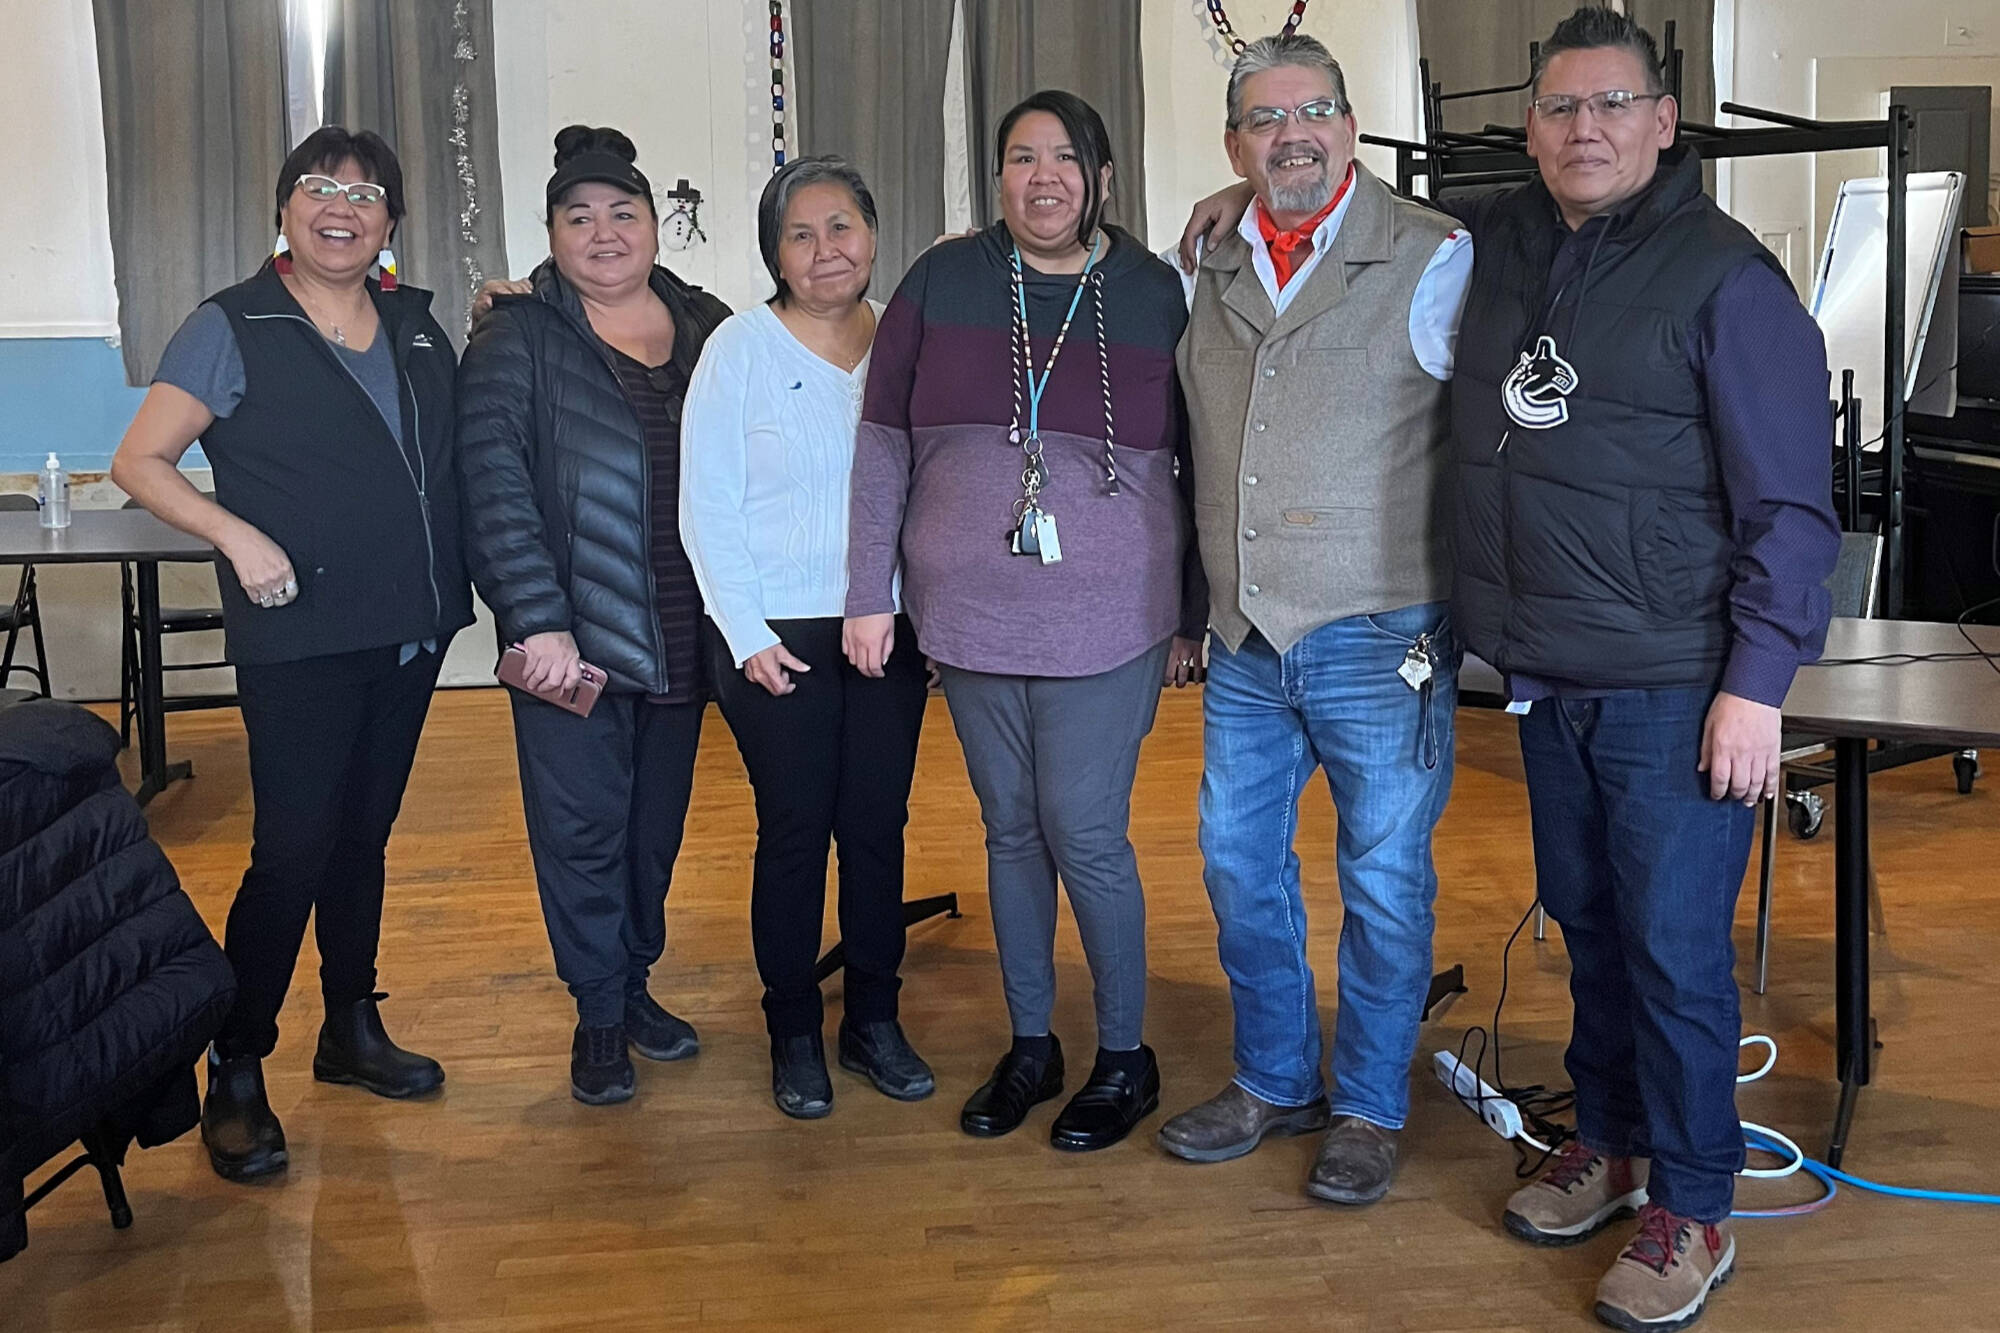 The new Neskonlith council, elected Jan. 26, 2023, from left, is: Councillor Frances Narcisse (Salmon Arm), Coun. Joan Hooper, Coun. Shirley Anderson, Coun. Mindy Dick, Kukpi7 (Chief) Irvin Wai and Coun. Brad Arnouse. (Tara Willard photo)